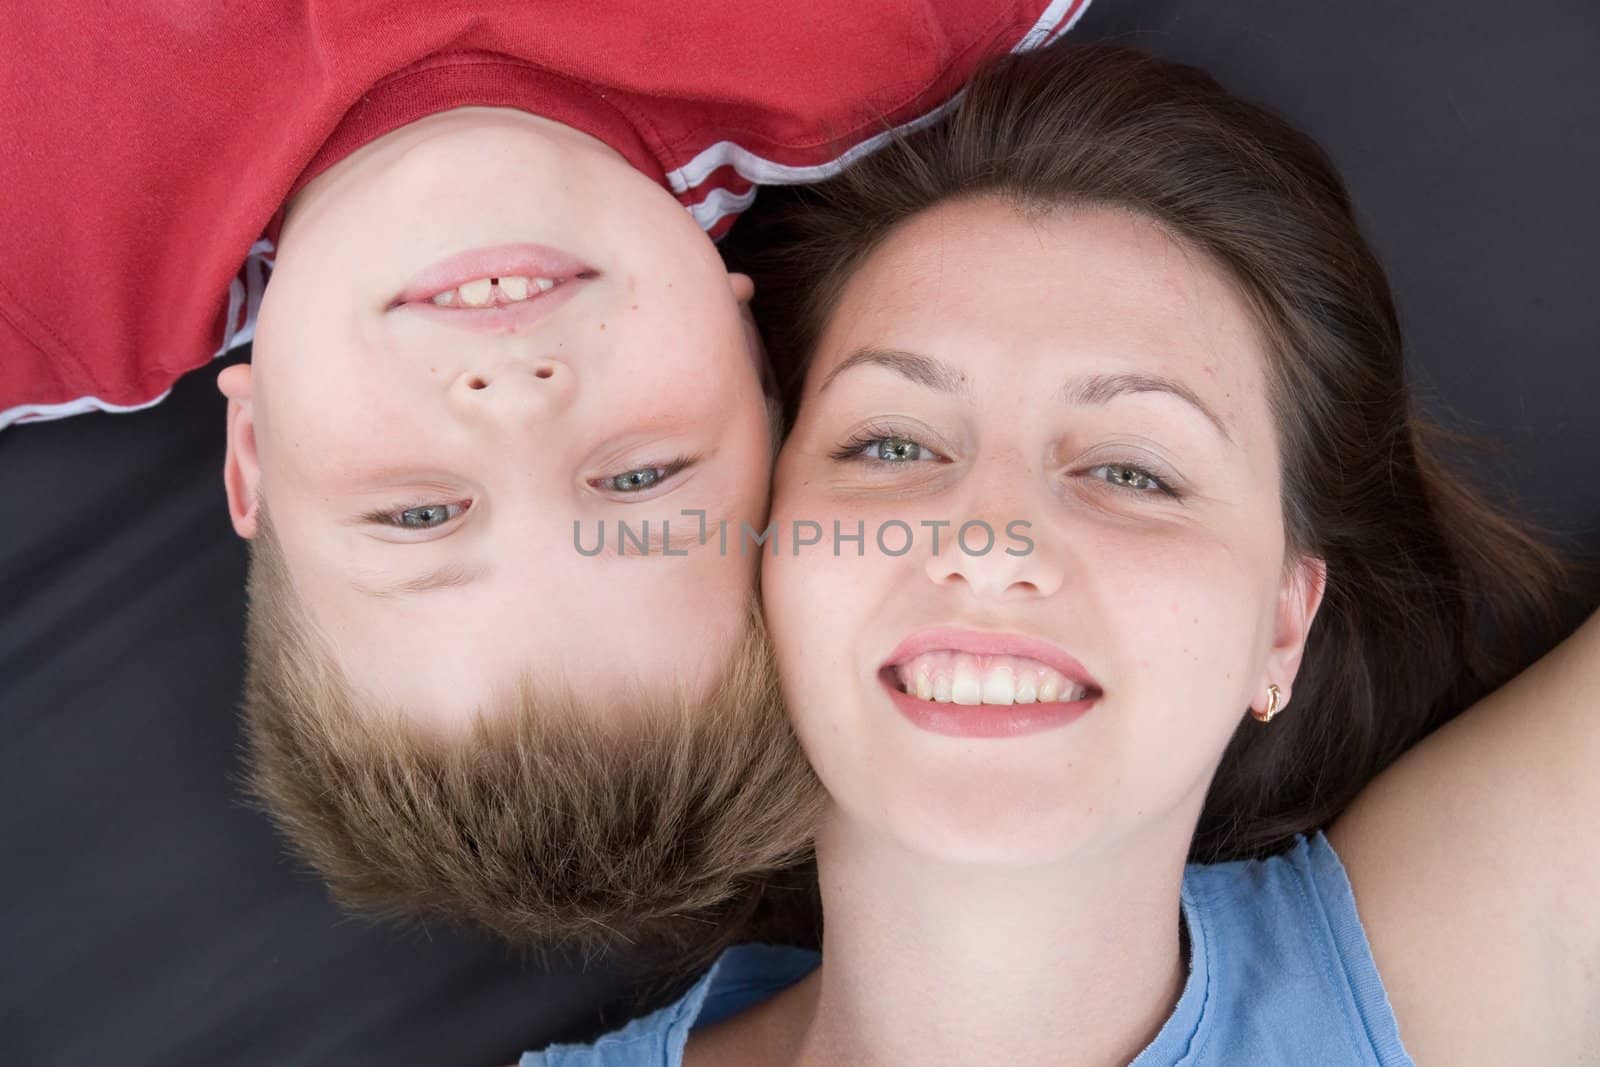 Mum and the son smile. A close up. The top view.